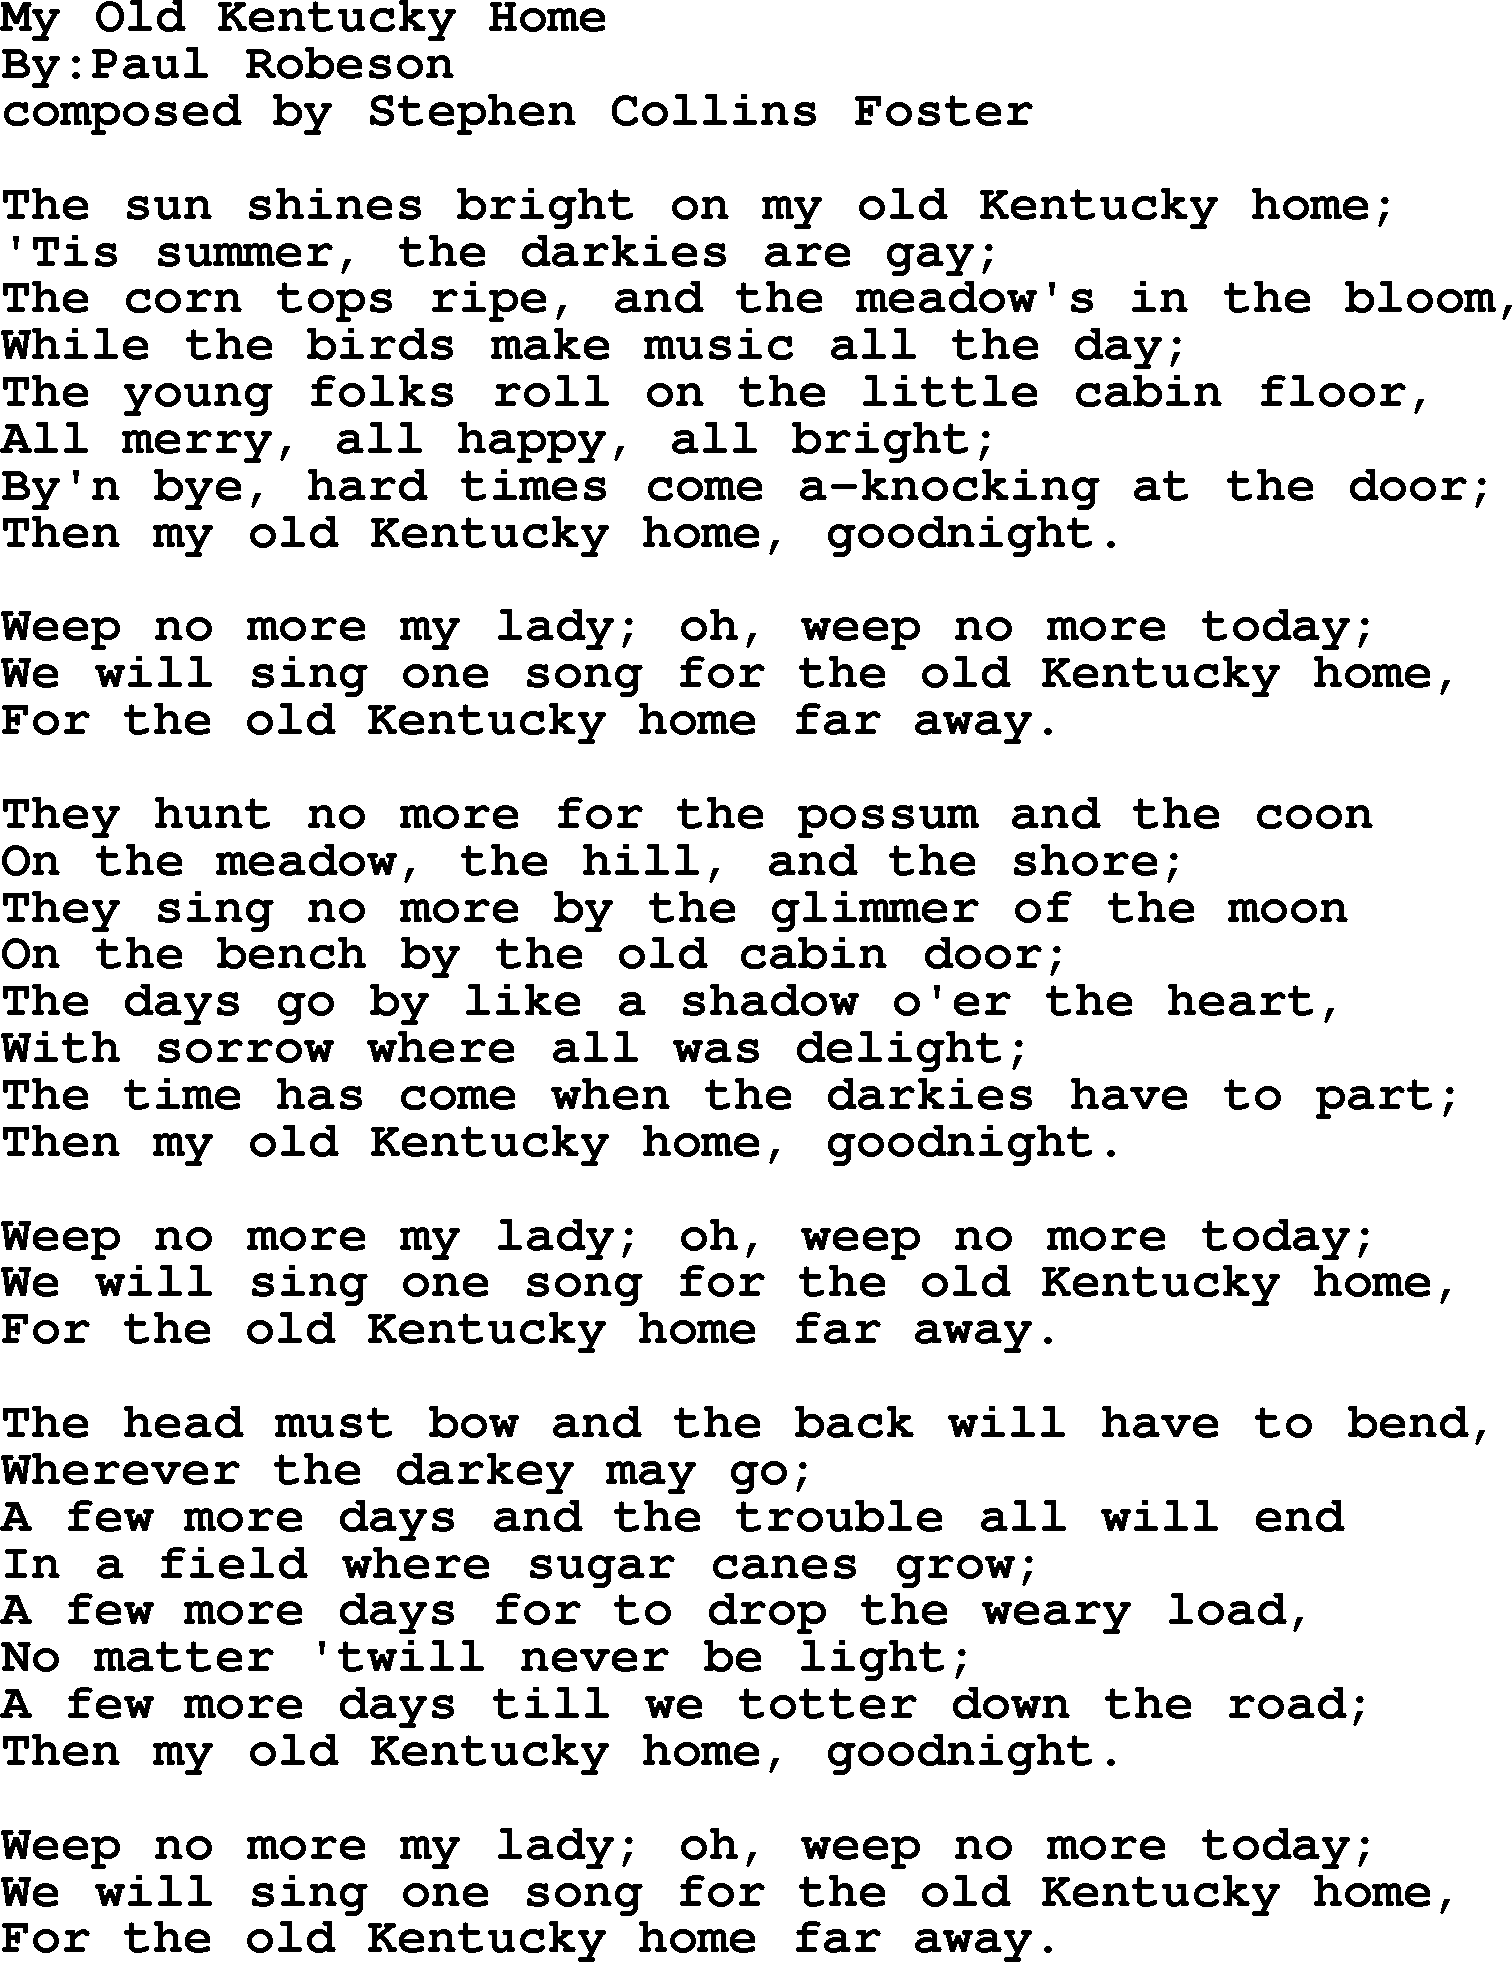 Political, Solidarity, Workers or Union song: My Old Kentucky Home, lyrics